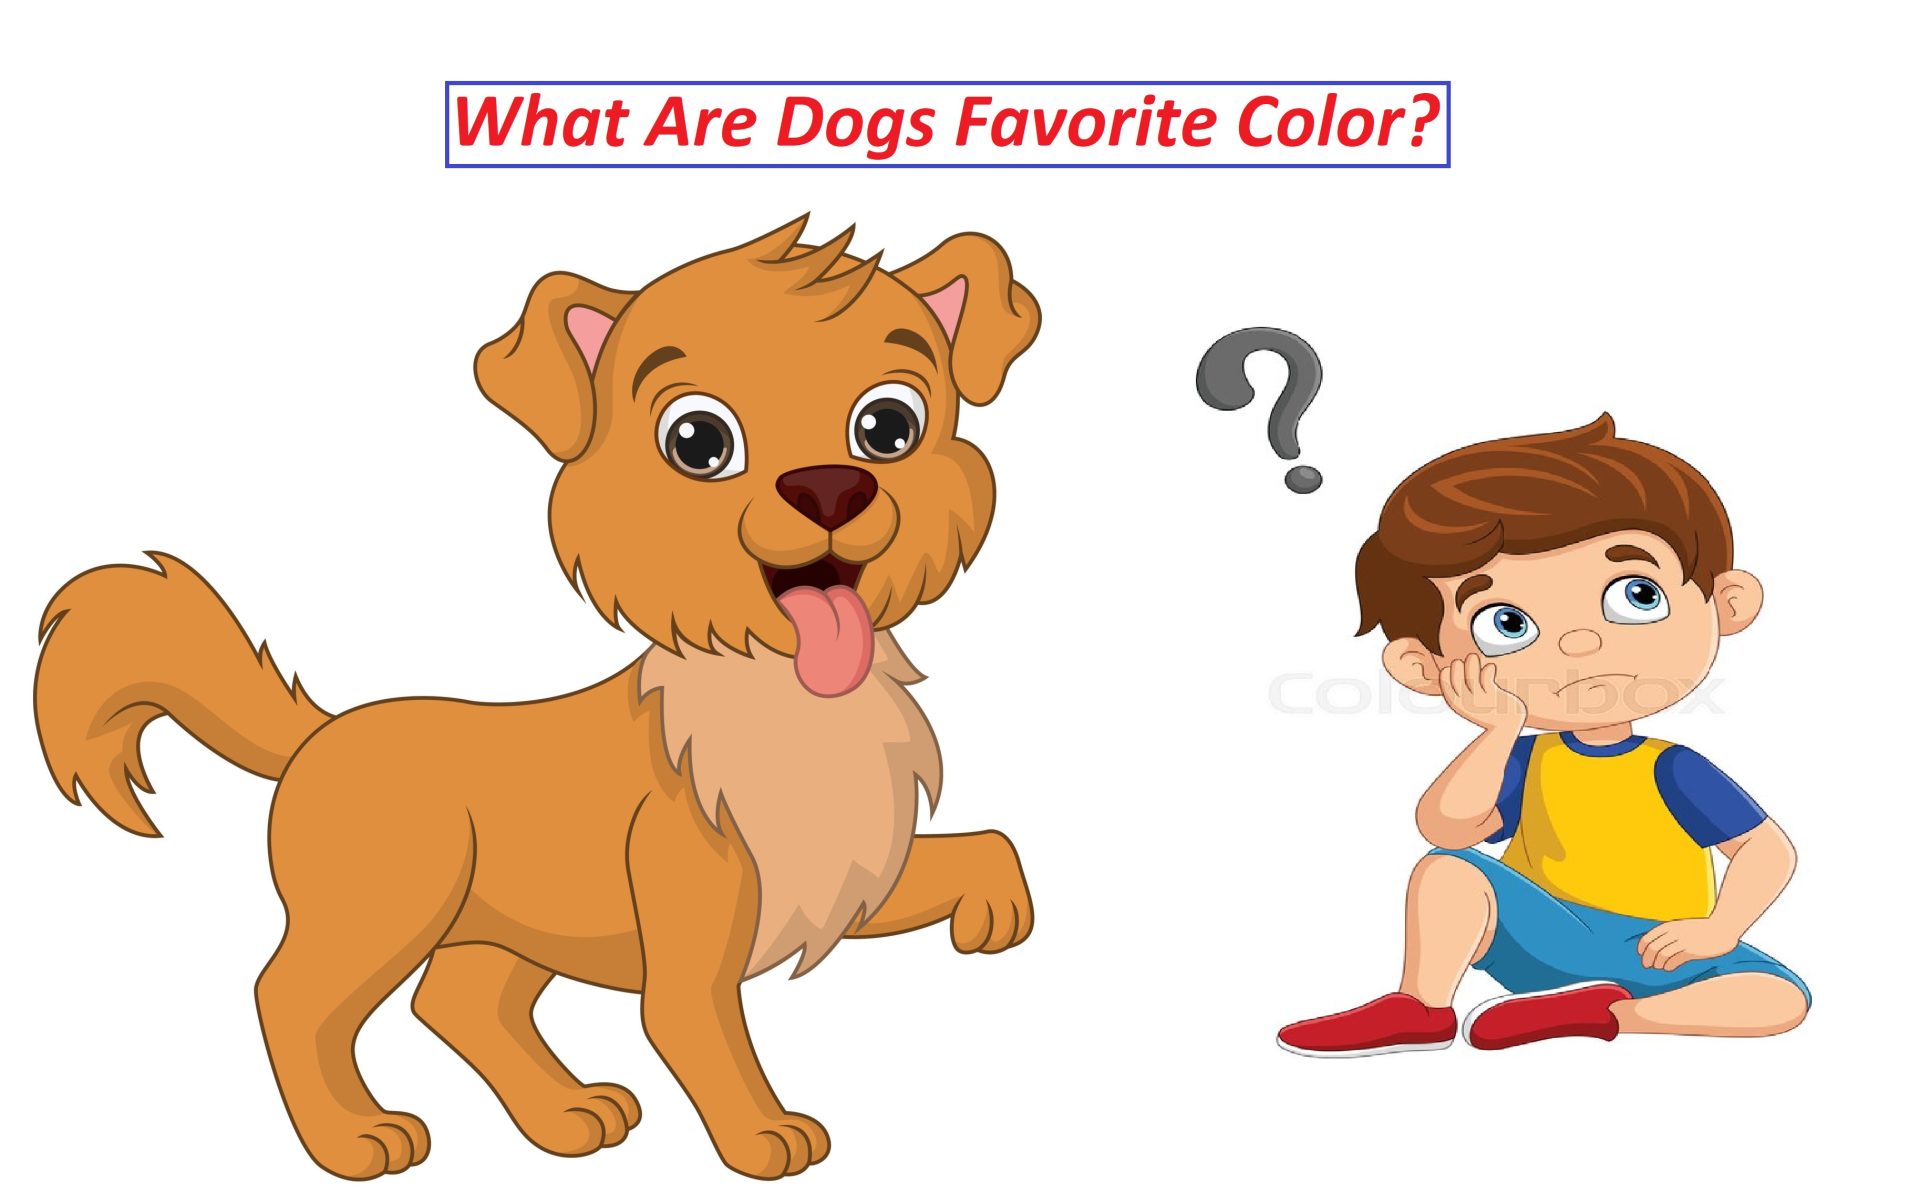 What Are Dogs Favorite Color?